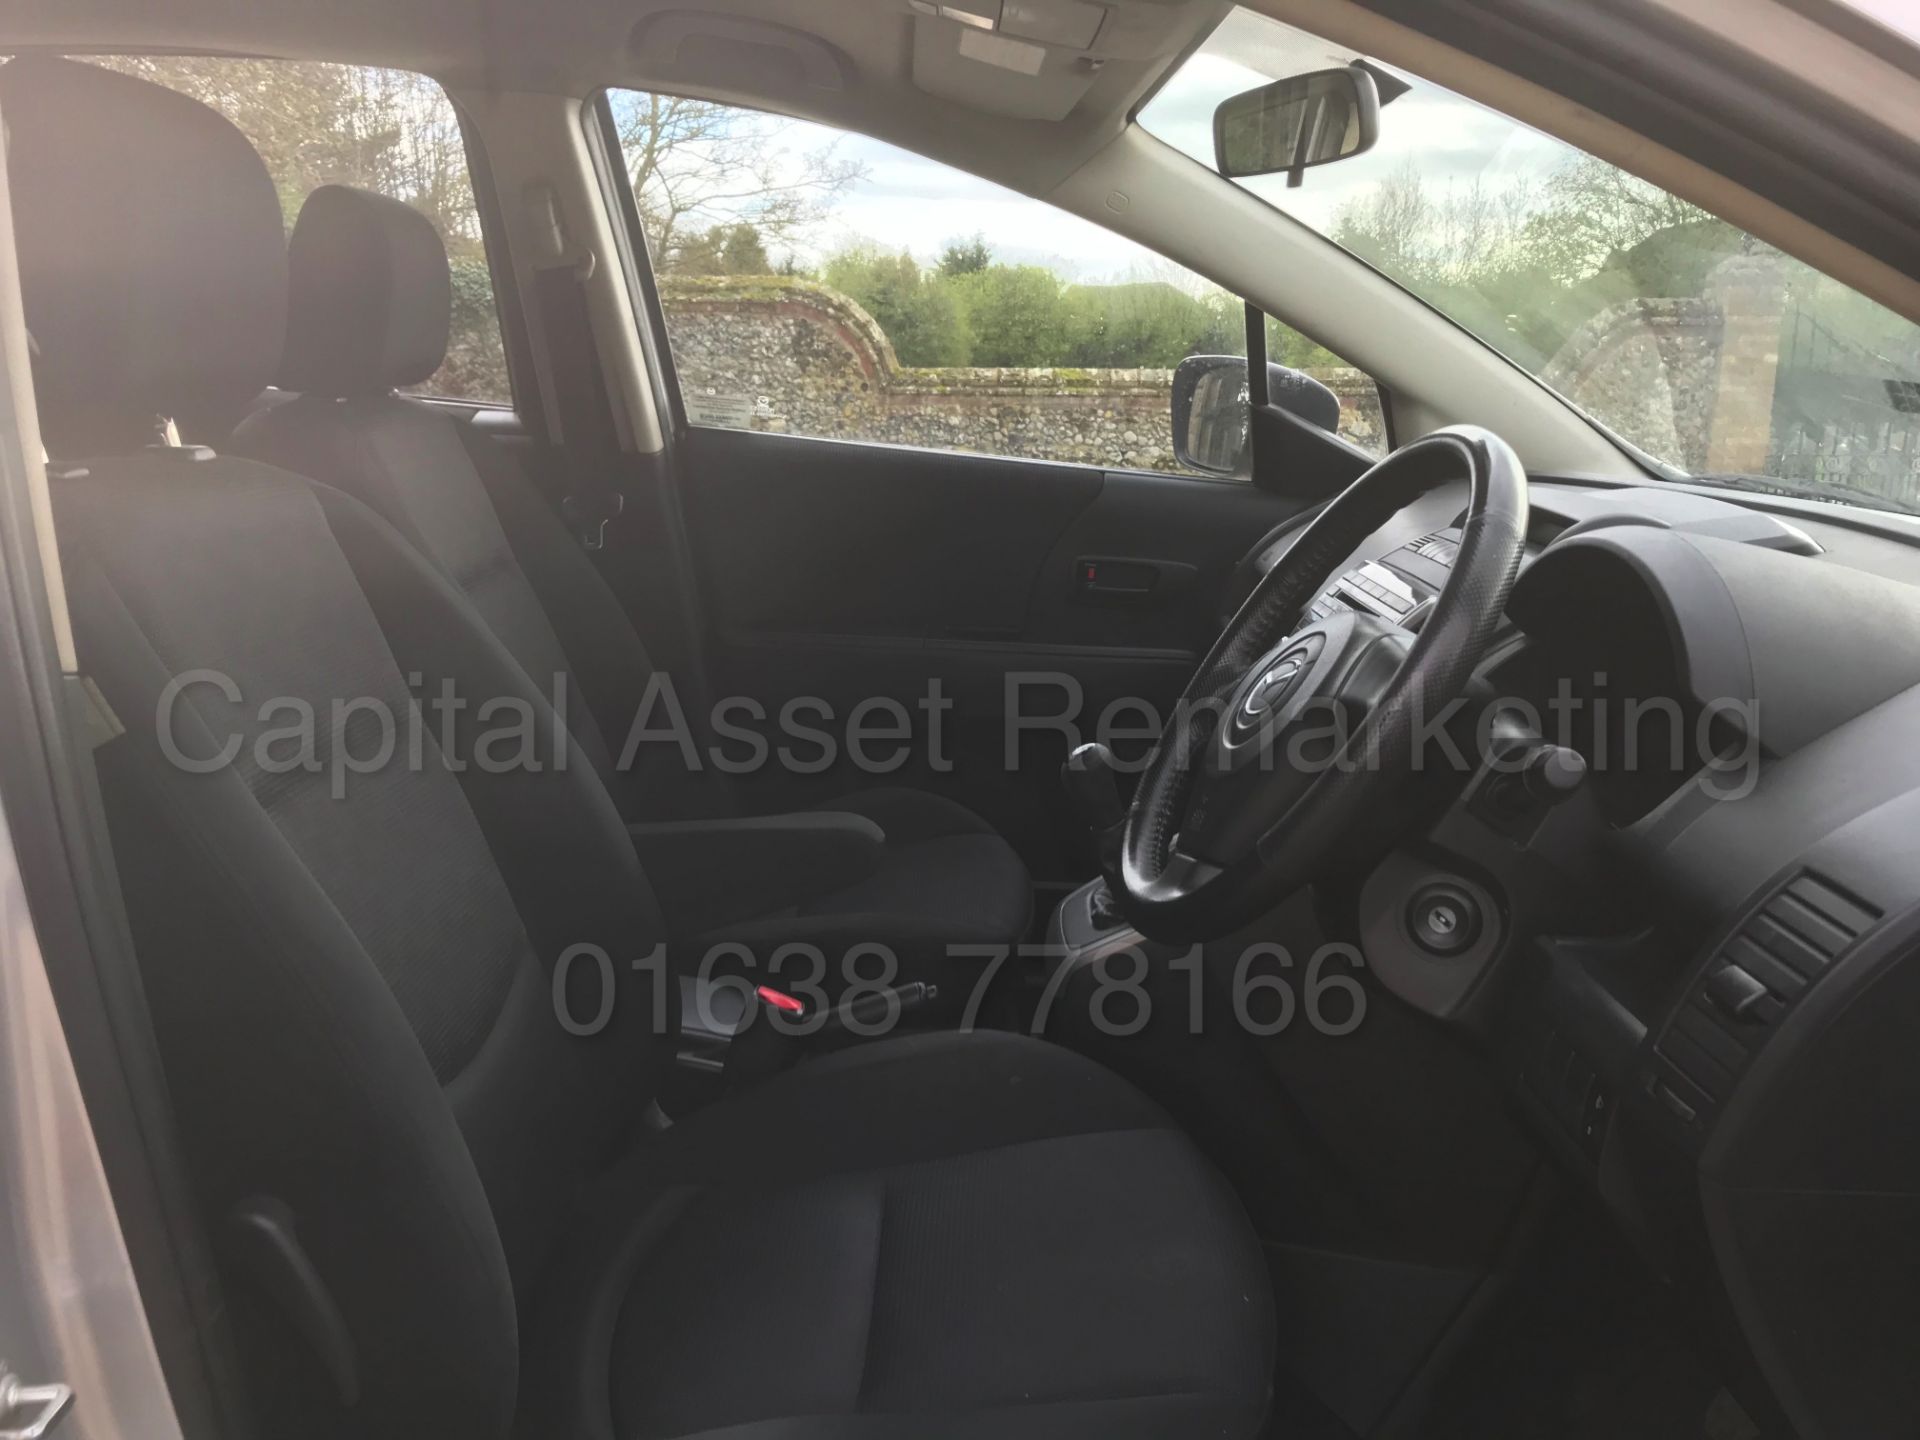 (On Sale) MAZDA 5 'TS2' (2010 MODEL) '2.0 DIESEL - 110 BHP - 6 SPEED' *7 SEATER - AIR CON* (NO VAT) - Image 26 of 35